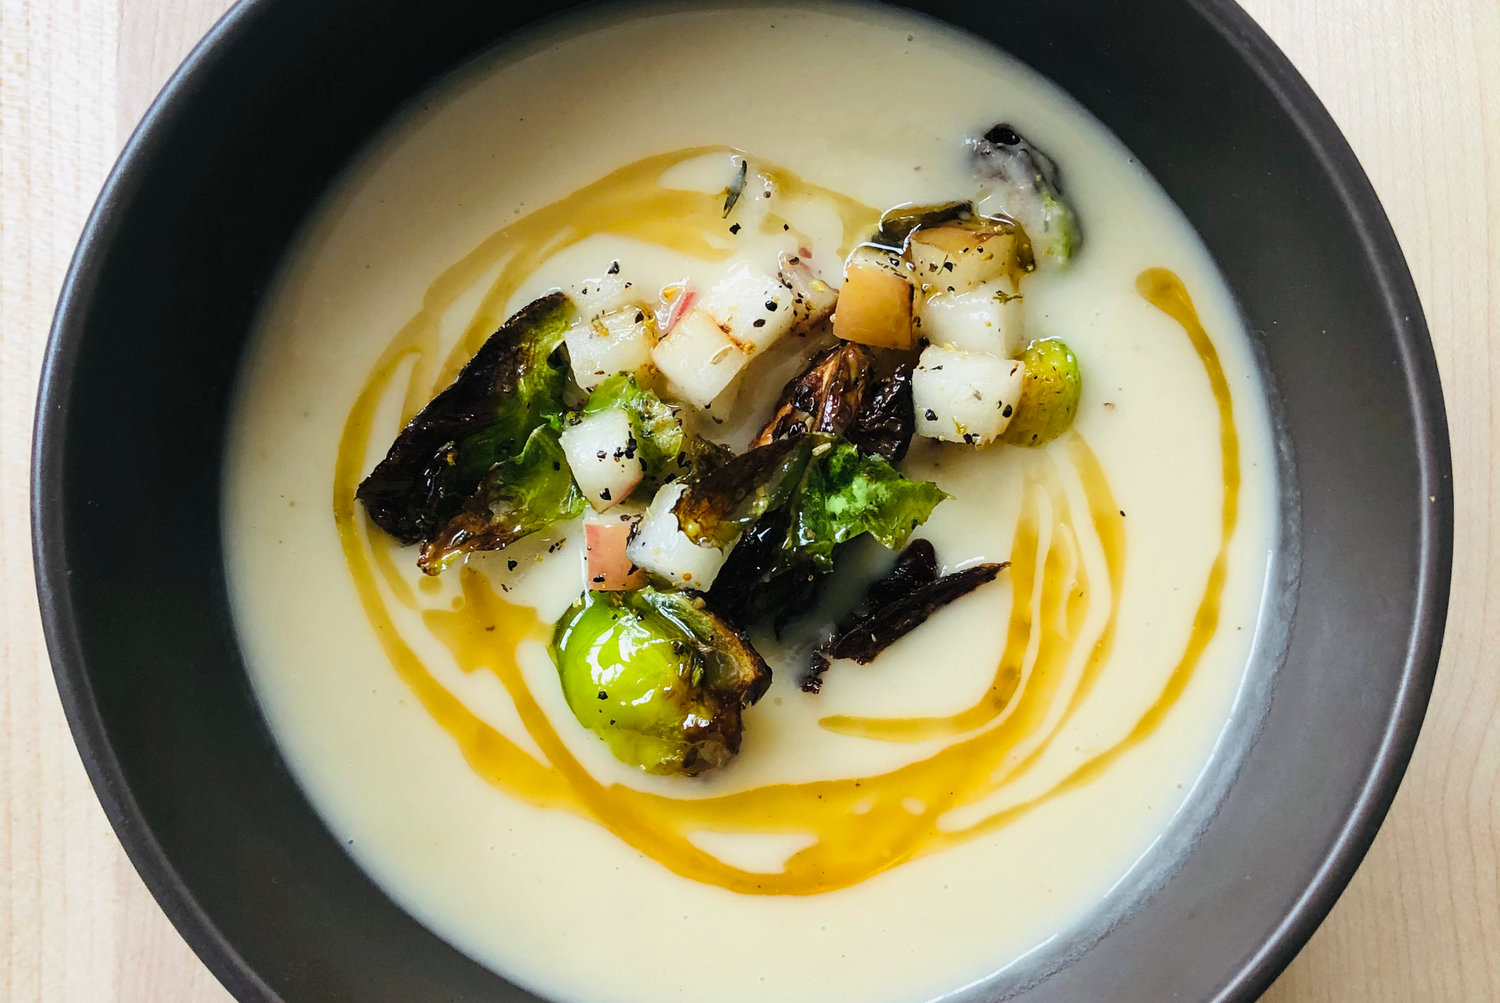 Sunchoke bisque with Brussels sprouts